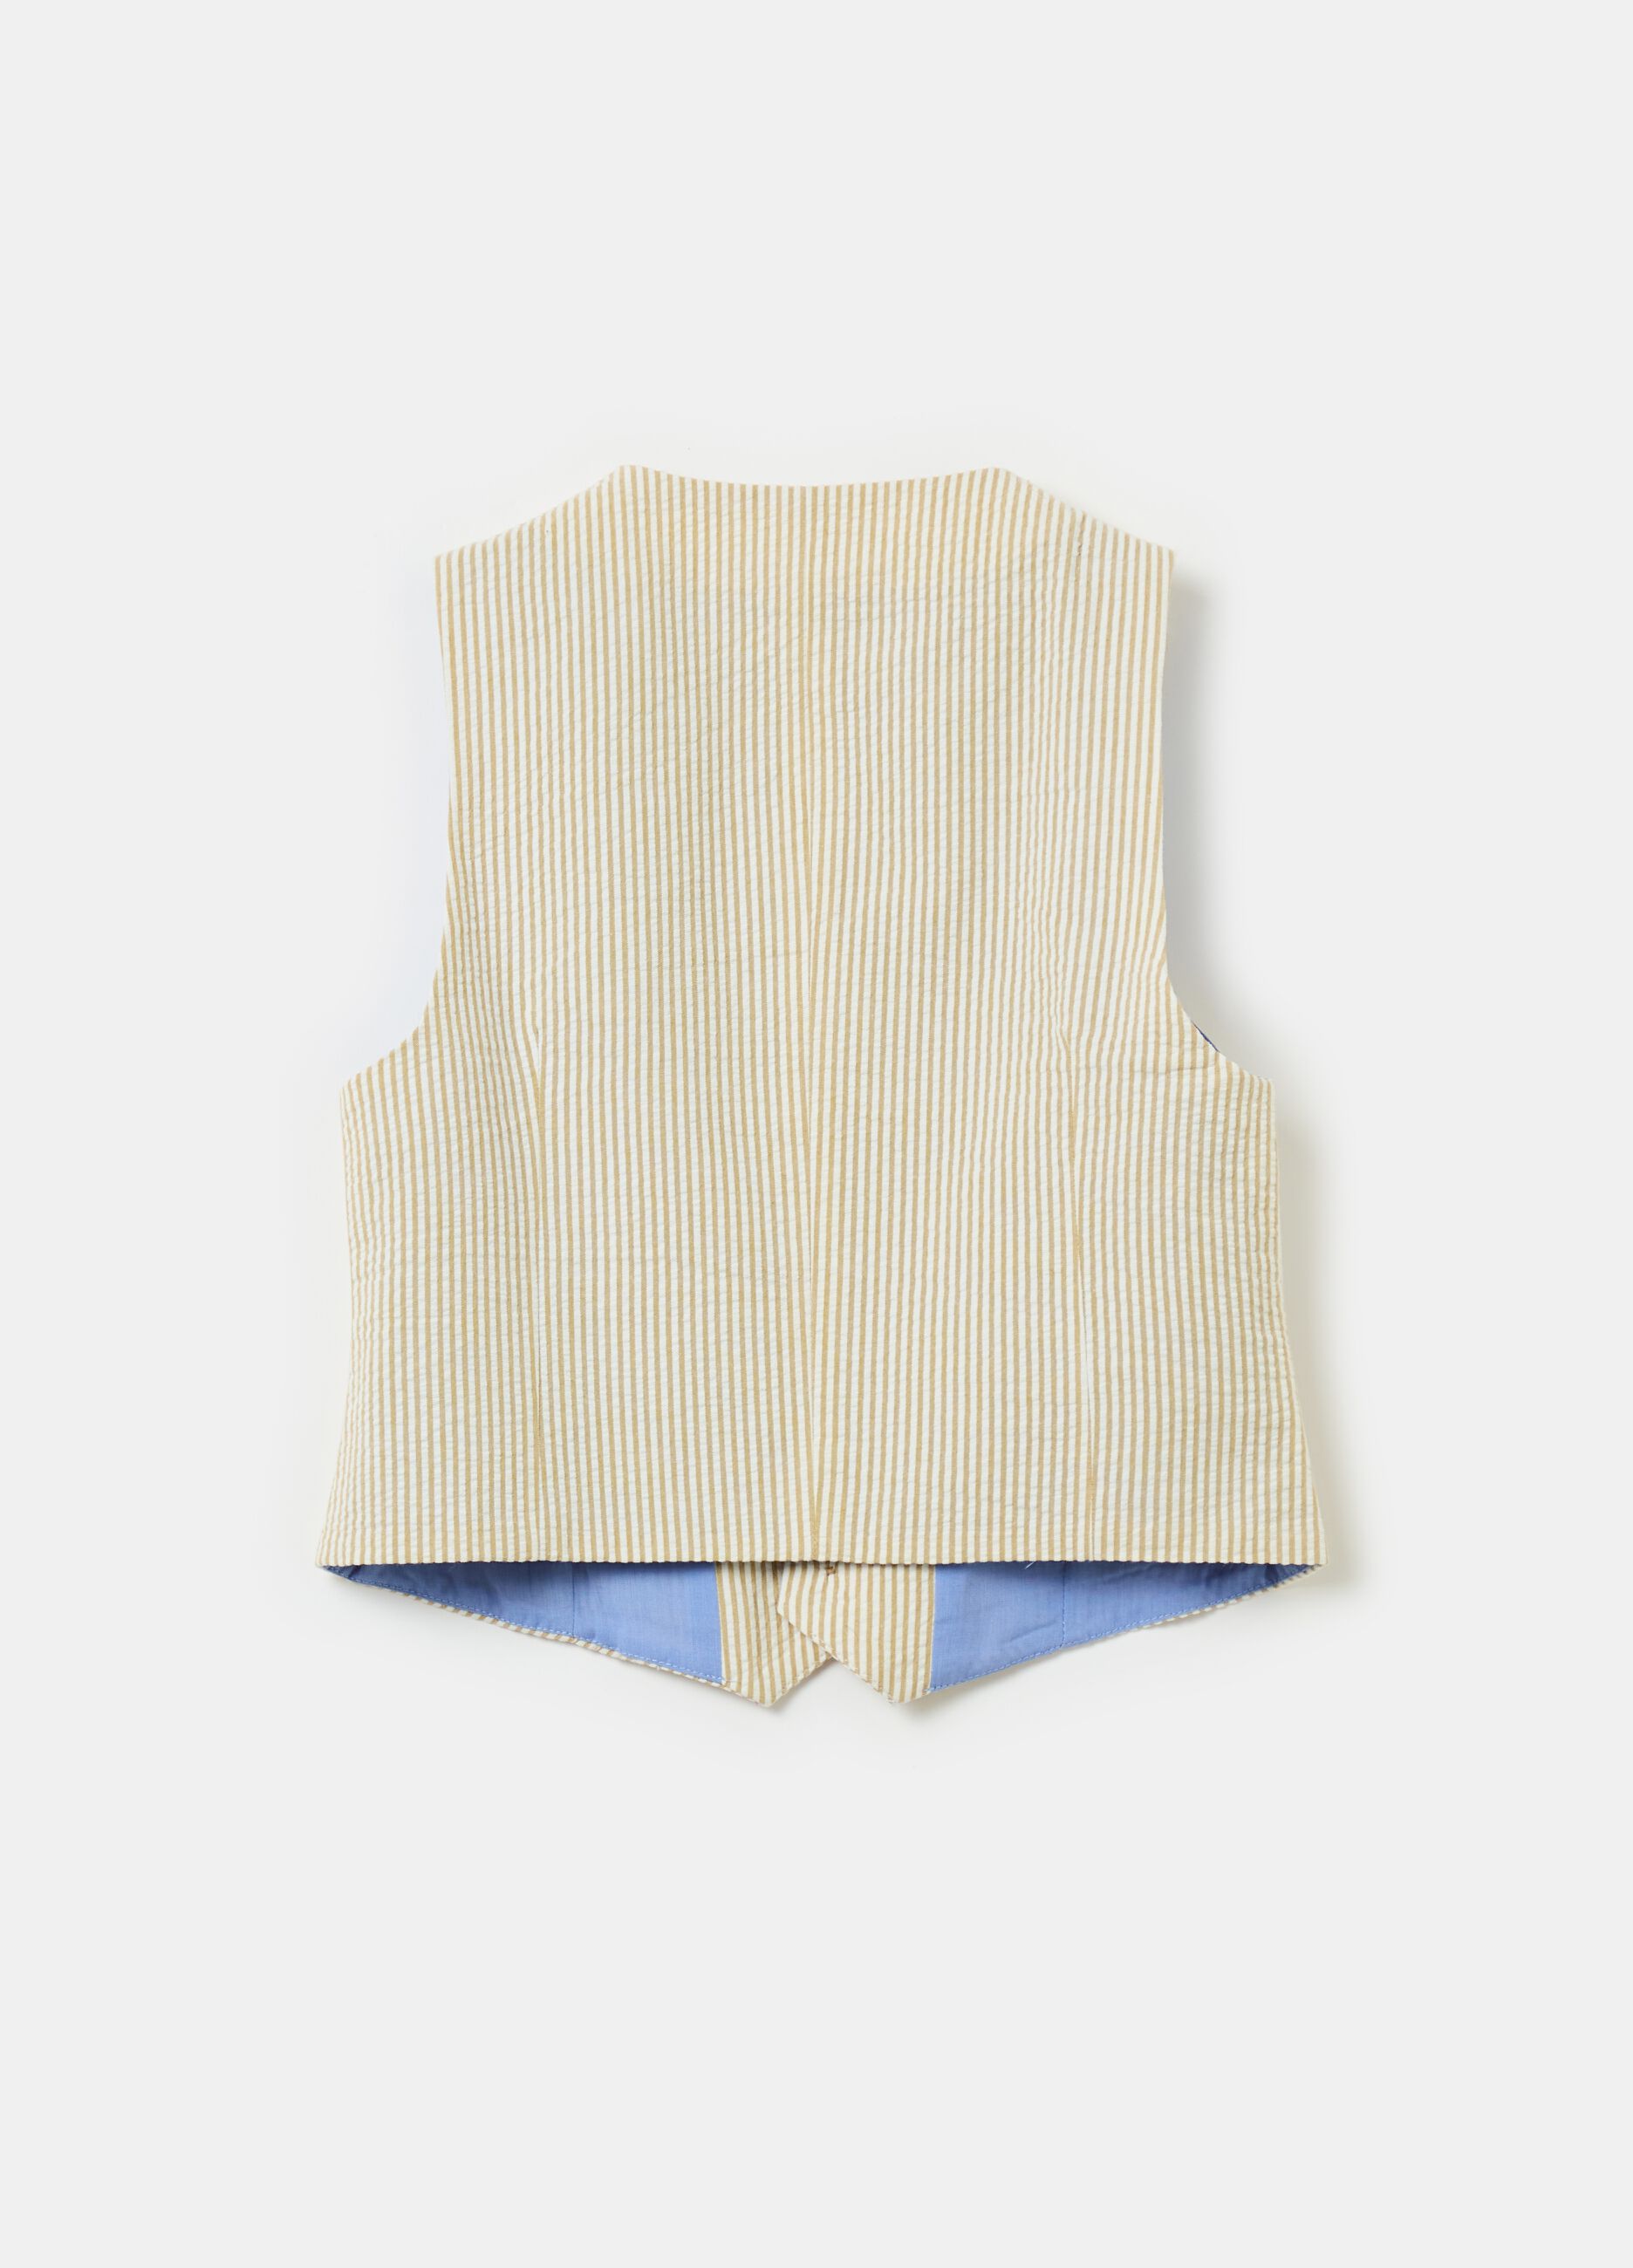 Cotton gilet with striped pattern